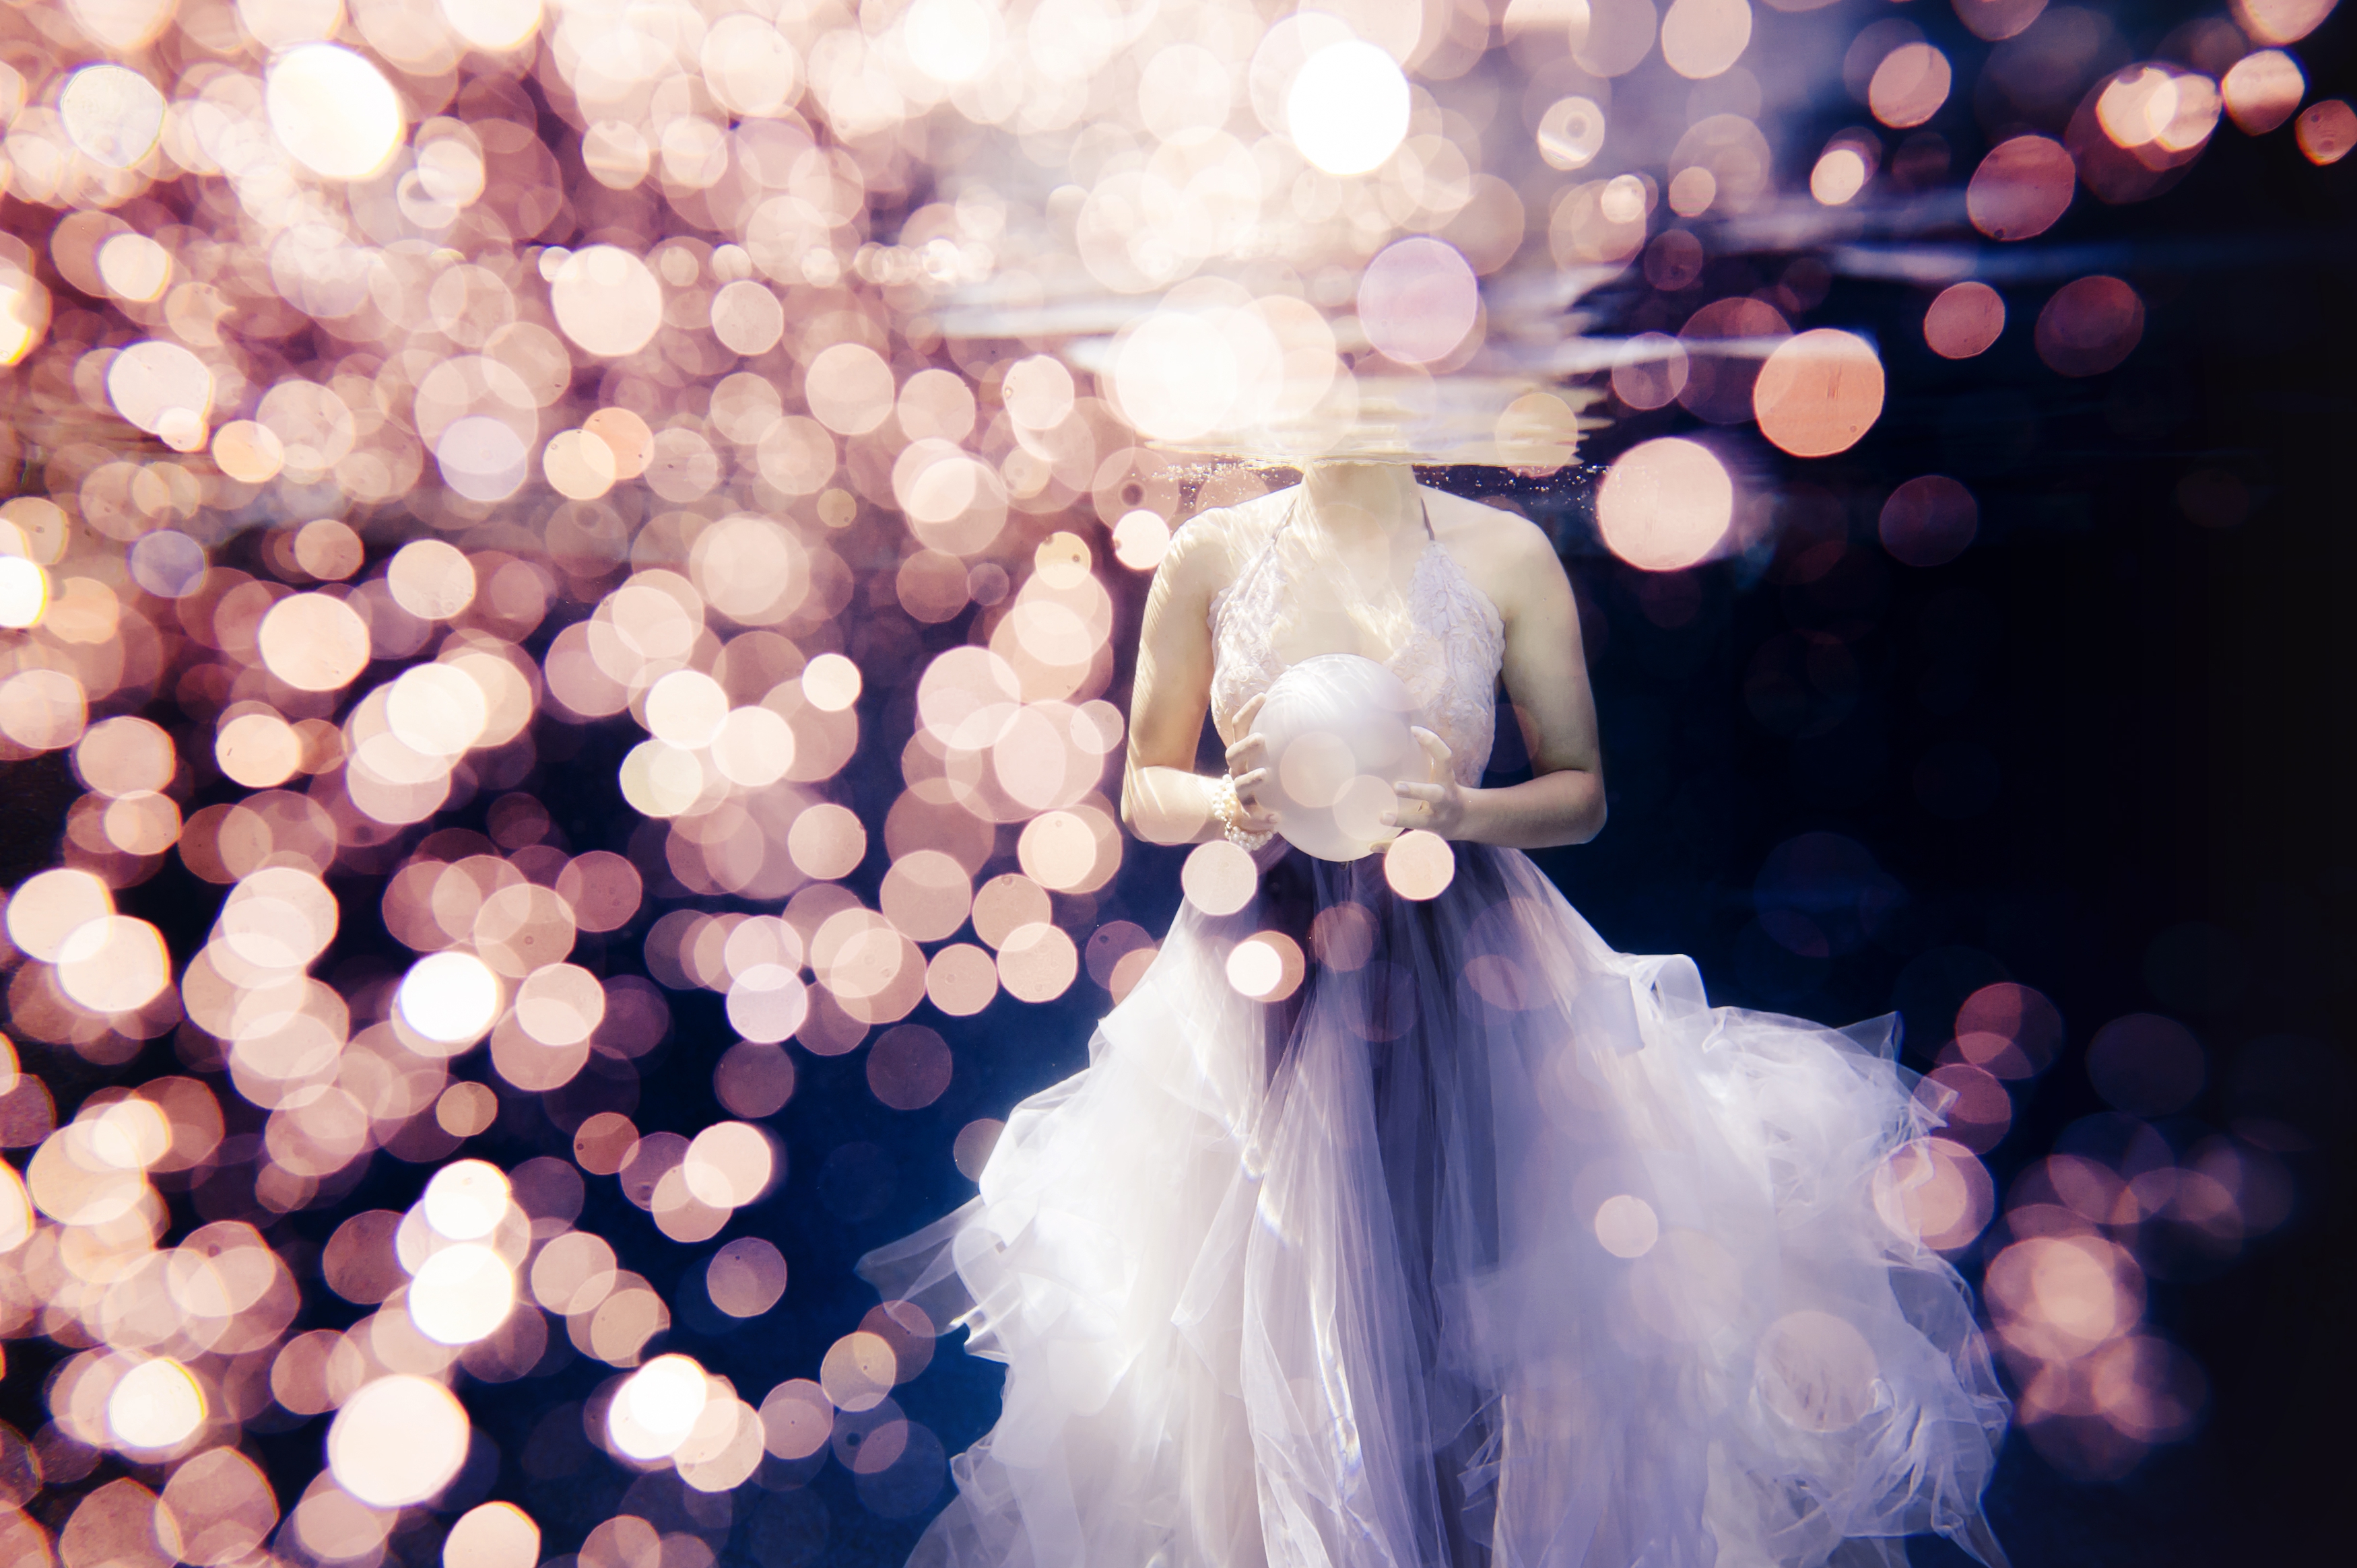 Charlotte Underwater Bride in Purple Dress with Pink and Lavender Bokeh Bubbles and White Orb | by RENEE STENGEL Photography